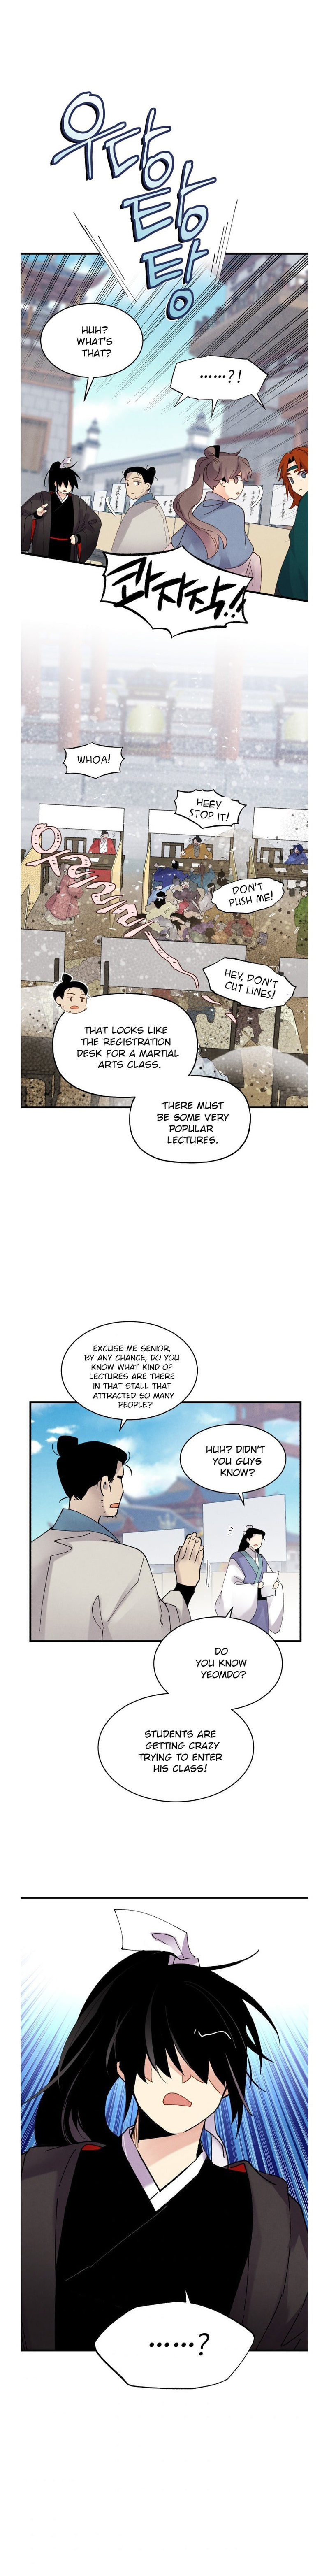 Lightning Degree - Chapter 84 Page 2